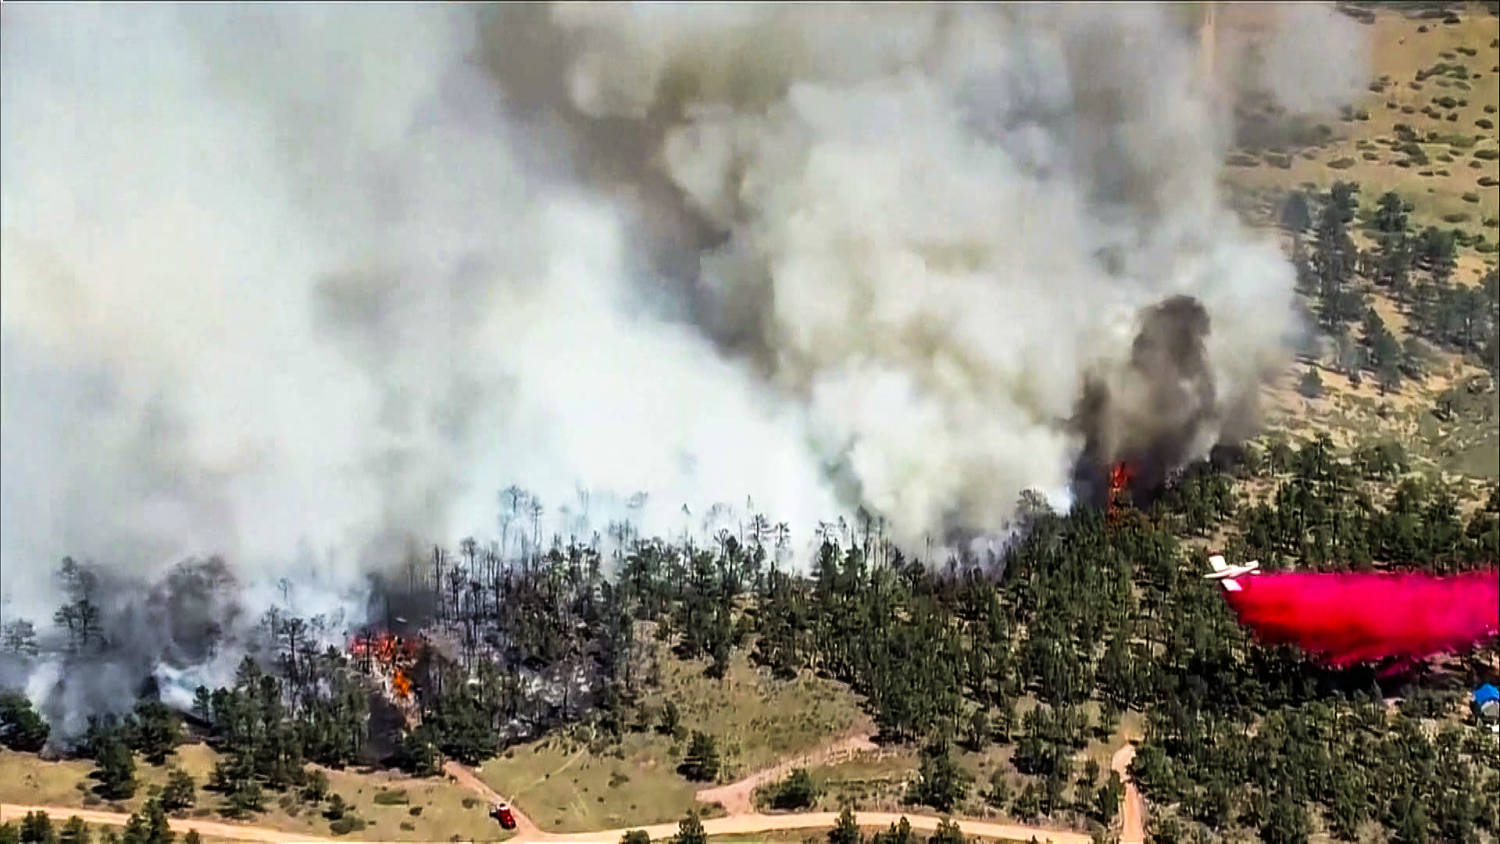 At least 1 person killed in Colorado's Stone Canyon Fire; blazes force evacuations in Rockies